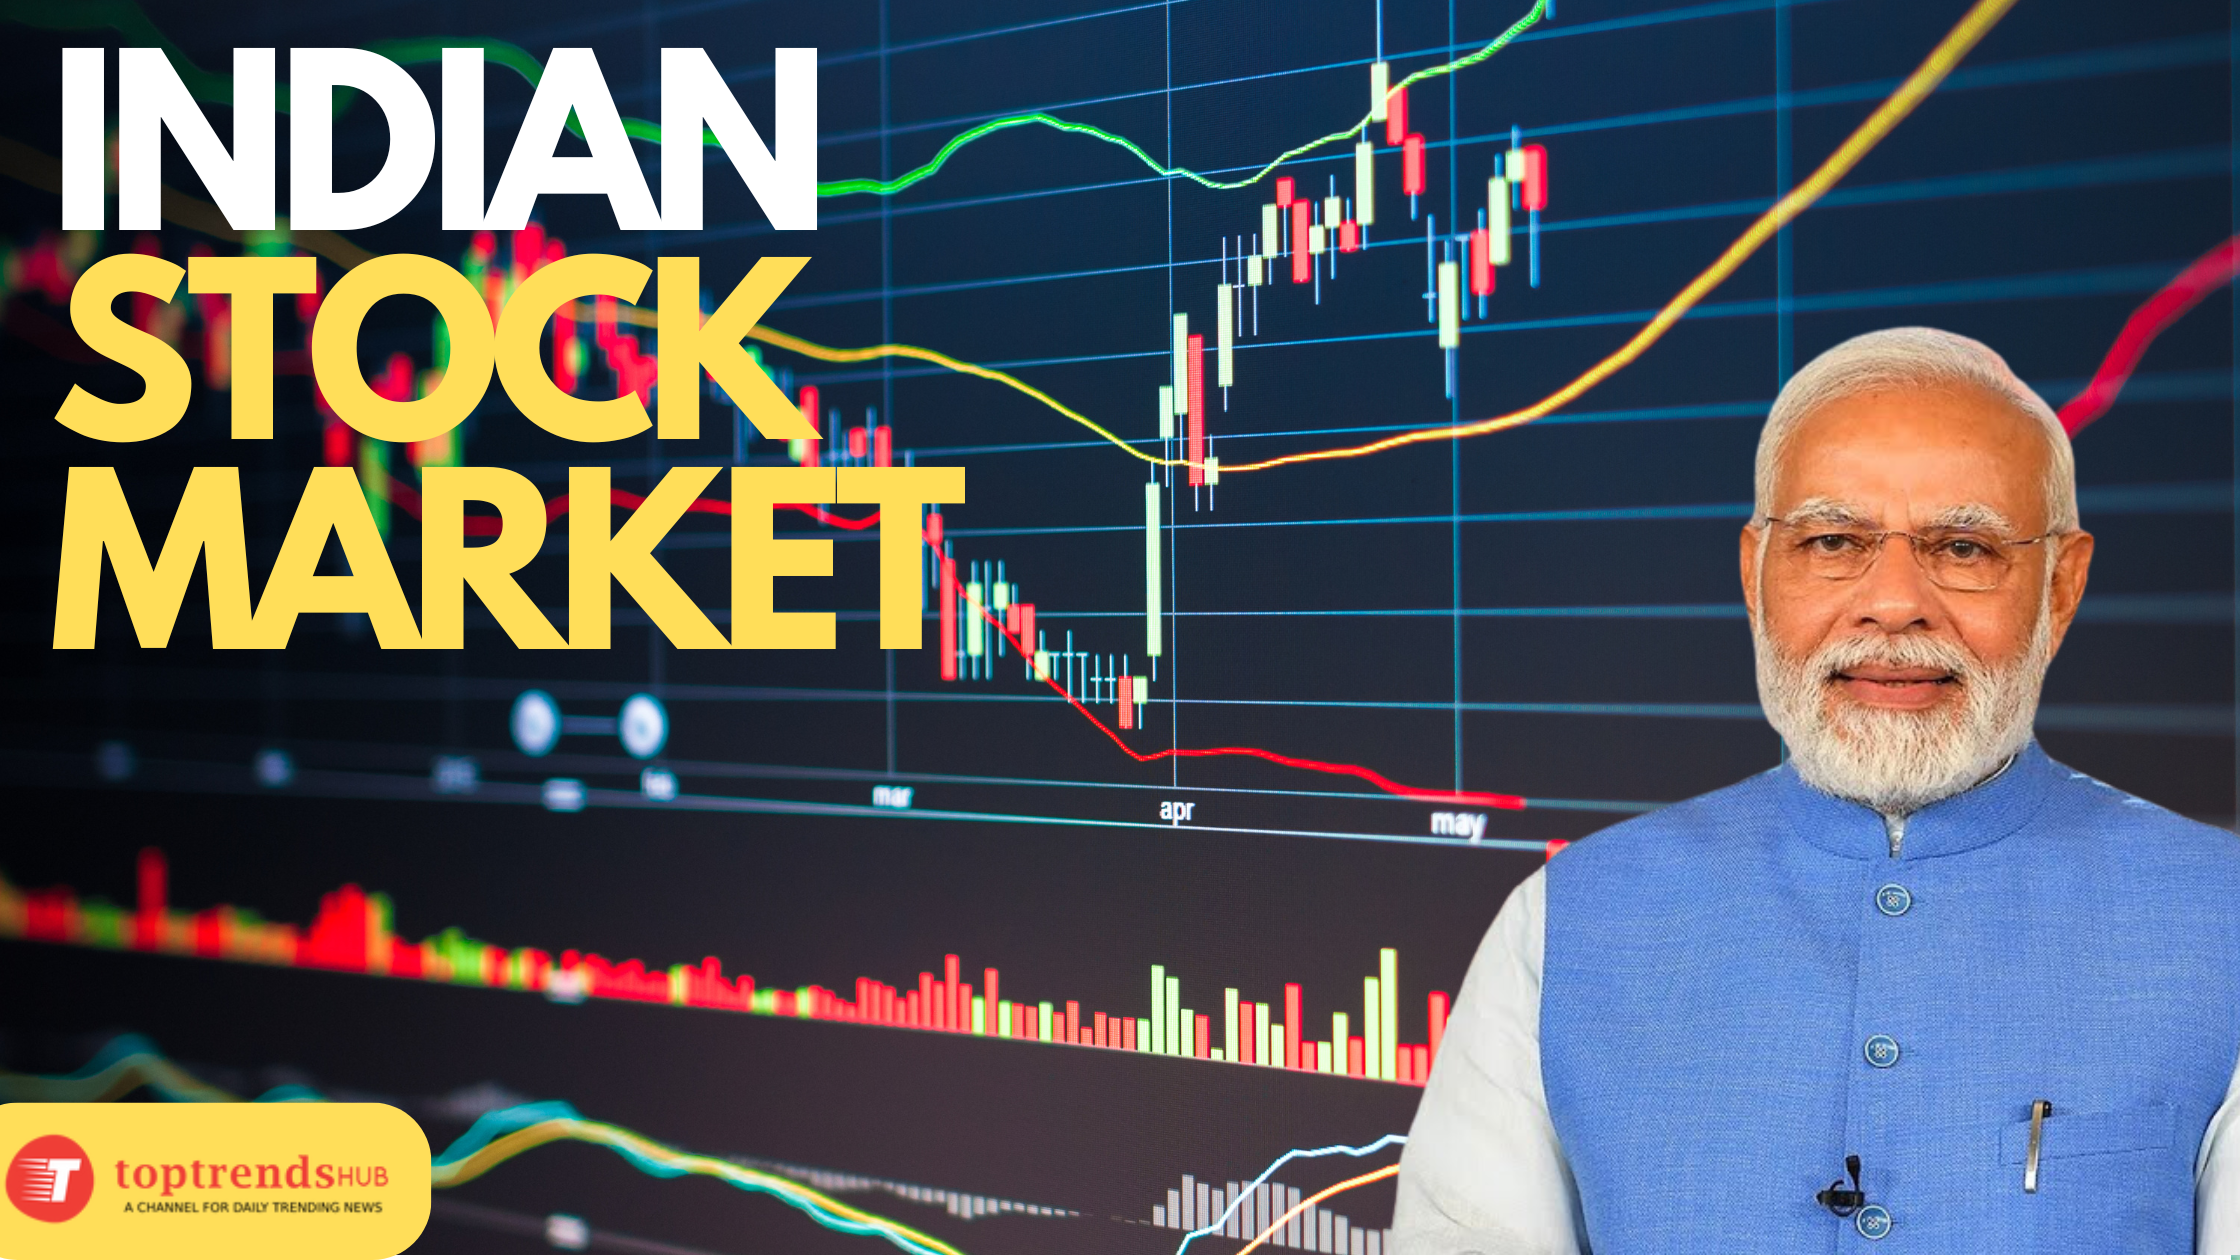 How PM Narendra Modi’s 2024 Re-Election Could Impact the Indian Stock Market